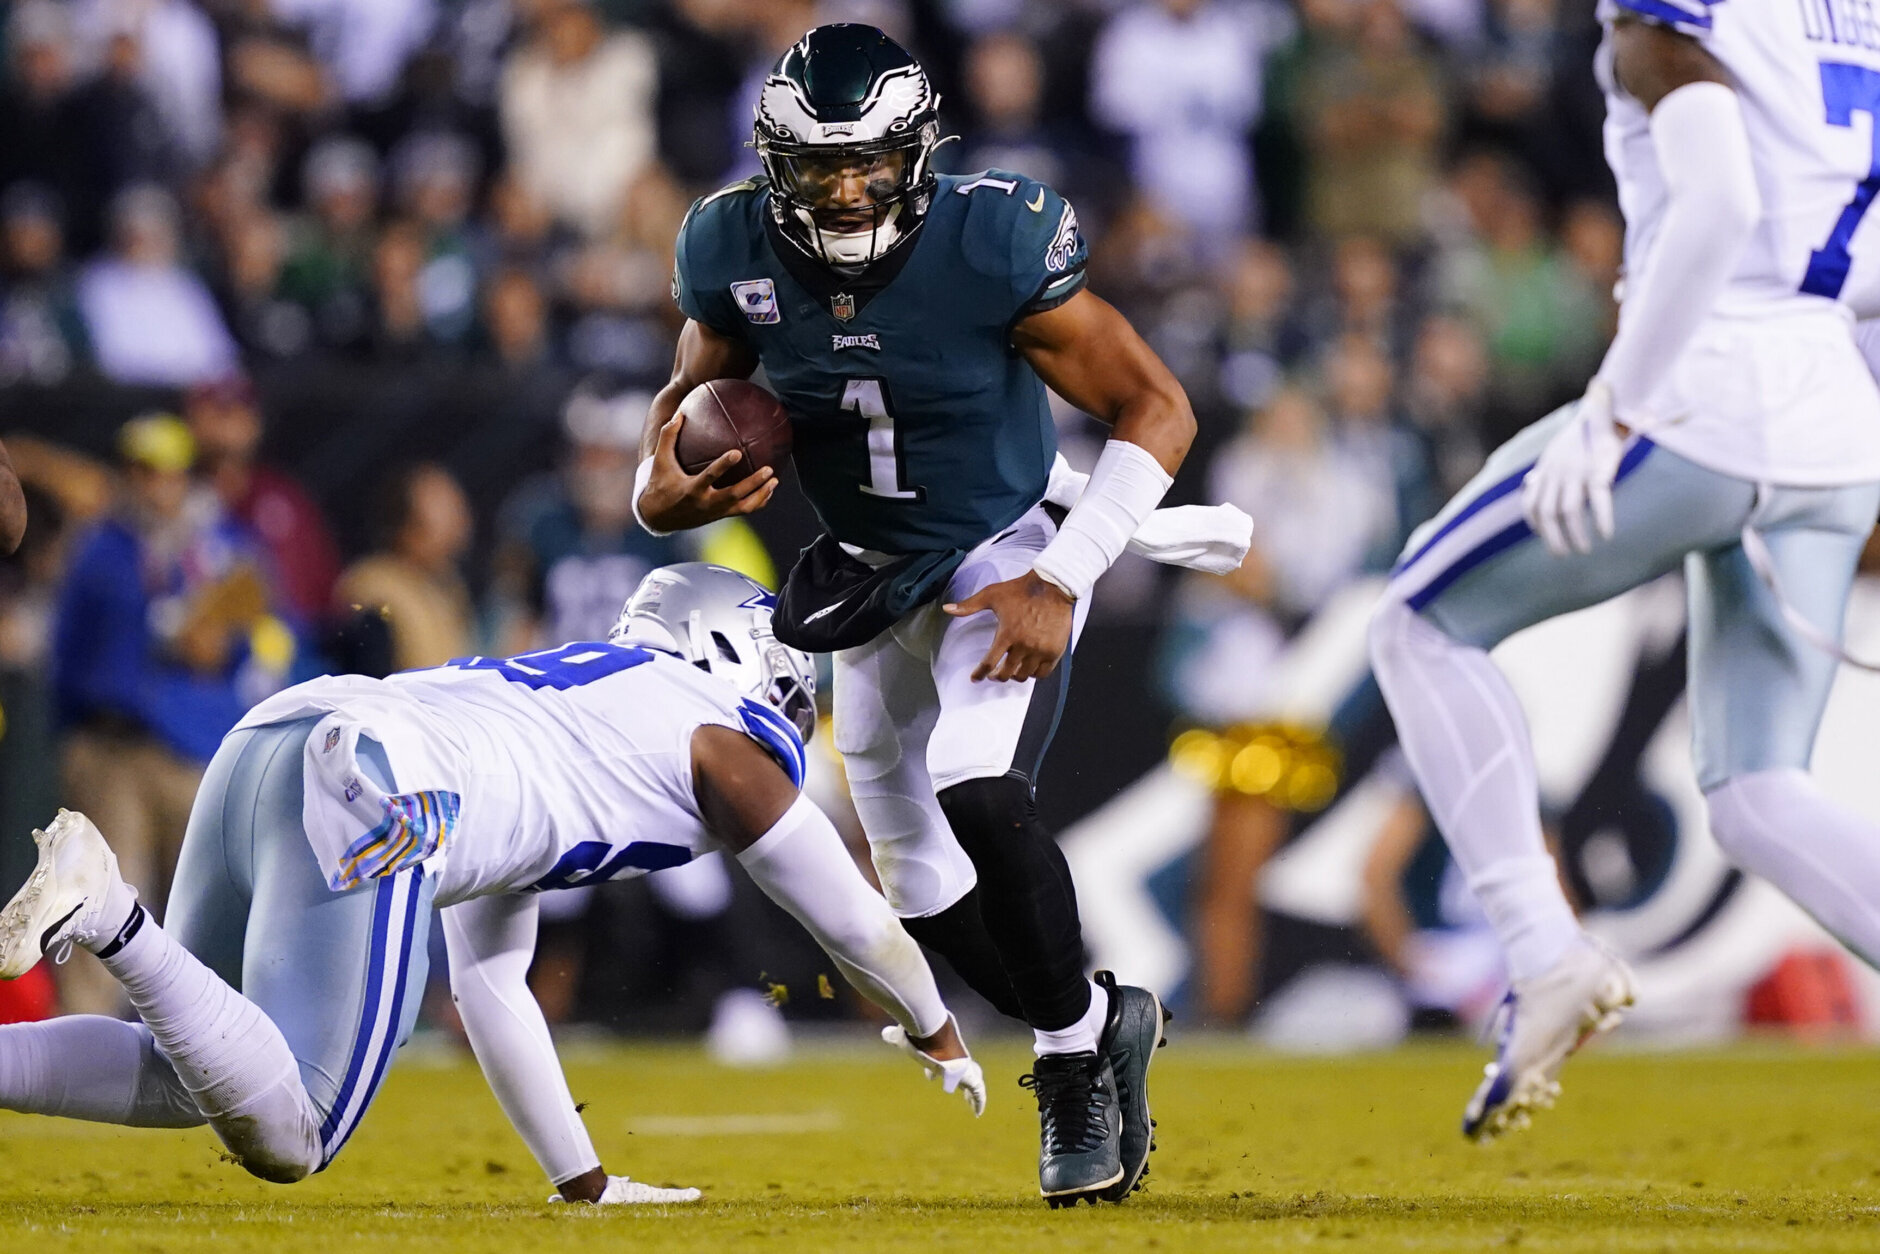 <p><b><i>Cowboys 17</i></b><br />
<b><i>Eagles 26</i></b></p>
<p>Hey, Demarcus Lawrence — <a href="https://profootballtalk.nbcsports.com/2022/10/13/demarcus-lawrence-on-jalen-hurts-we-dont-know-how-good-he-is-he-hasnt-played-us-yet/" target="_blank" rel="noopener">you&#8217;ve seen Jalen Hurts now</a>. He&#8217;s legit.</p>
<p>Hurts is Philly&#8217;s third QB to start a season 6-0, joining Ron Jaworski and Donovan McNabb — both of whom reached Super Bowls. It&#8217;s starting to look like Hurts will do the same.</p>
<p>And you see why Cooper Rush is a backup. Dallas is still Dak&#8217;s team.</p>
